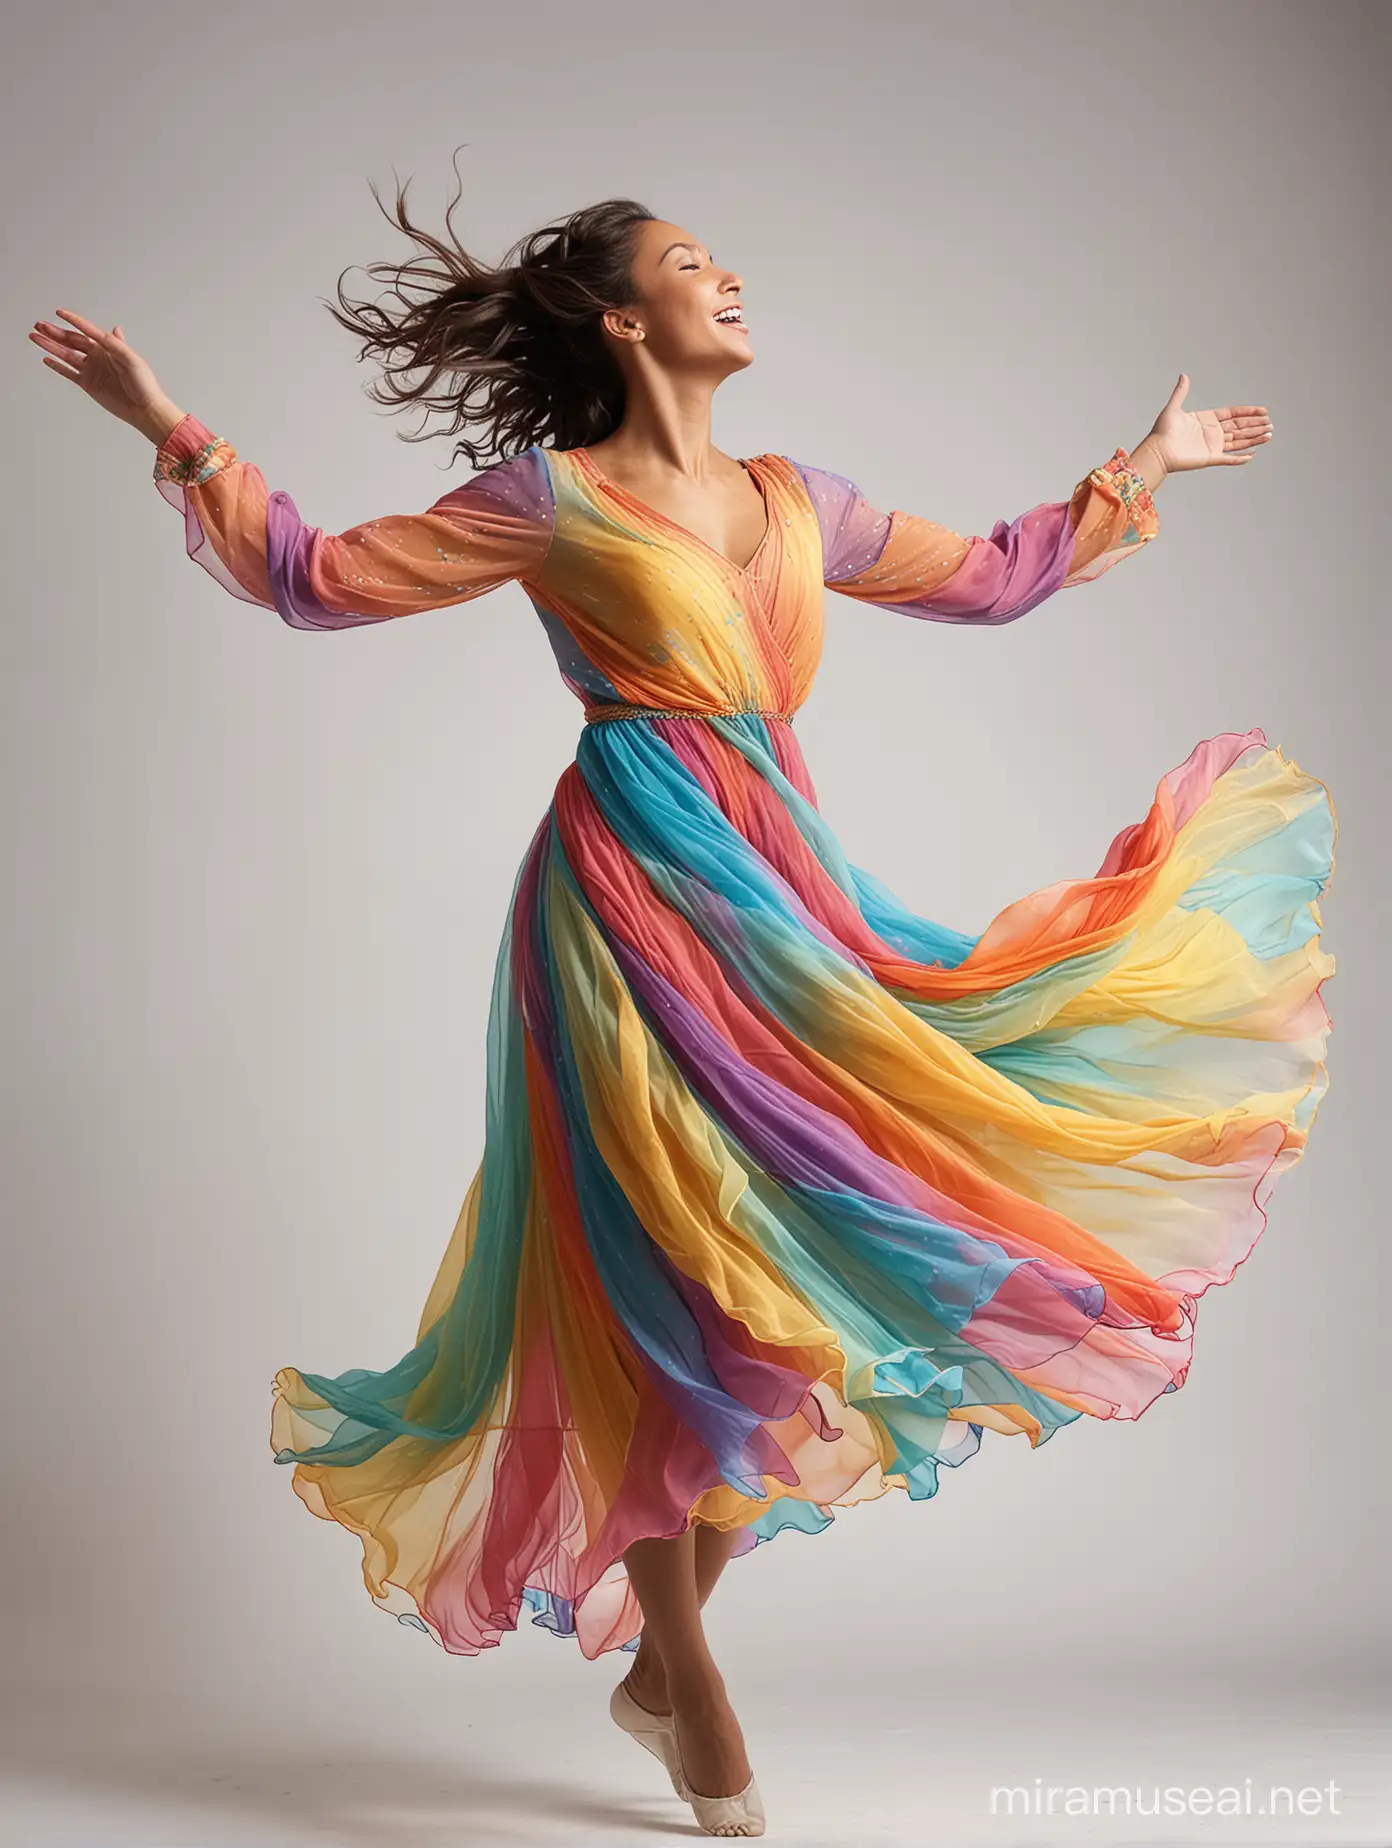 praise dancer leaping in the air. she's wear a colorful chiffon layeres dress with long sleeves. background is white cloth billowing in the wind.